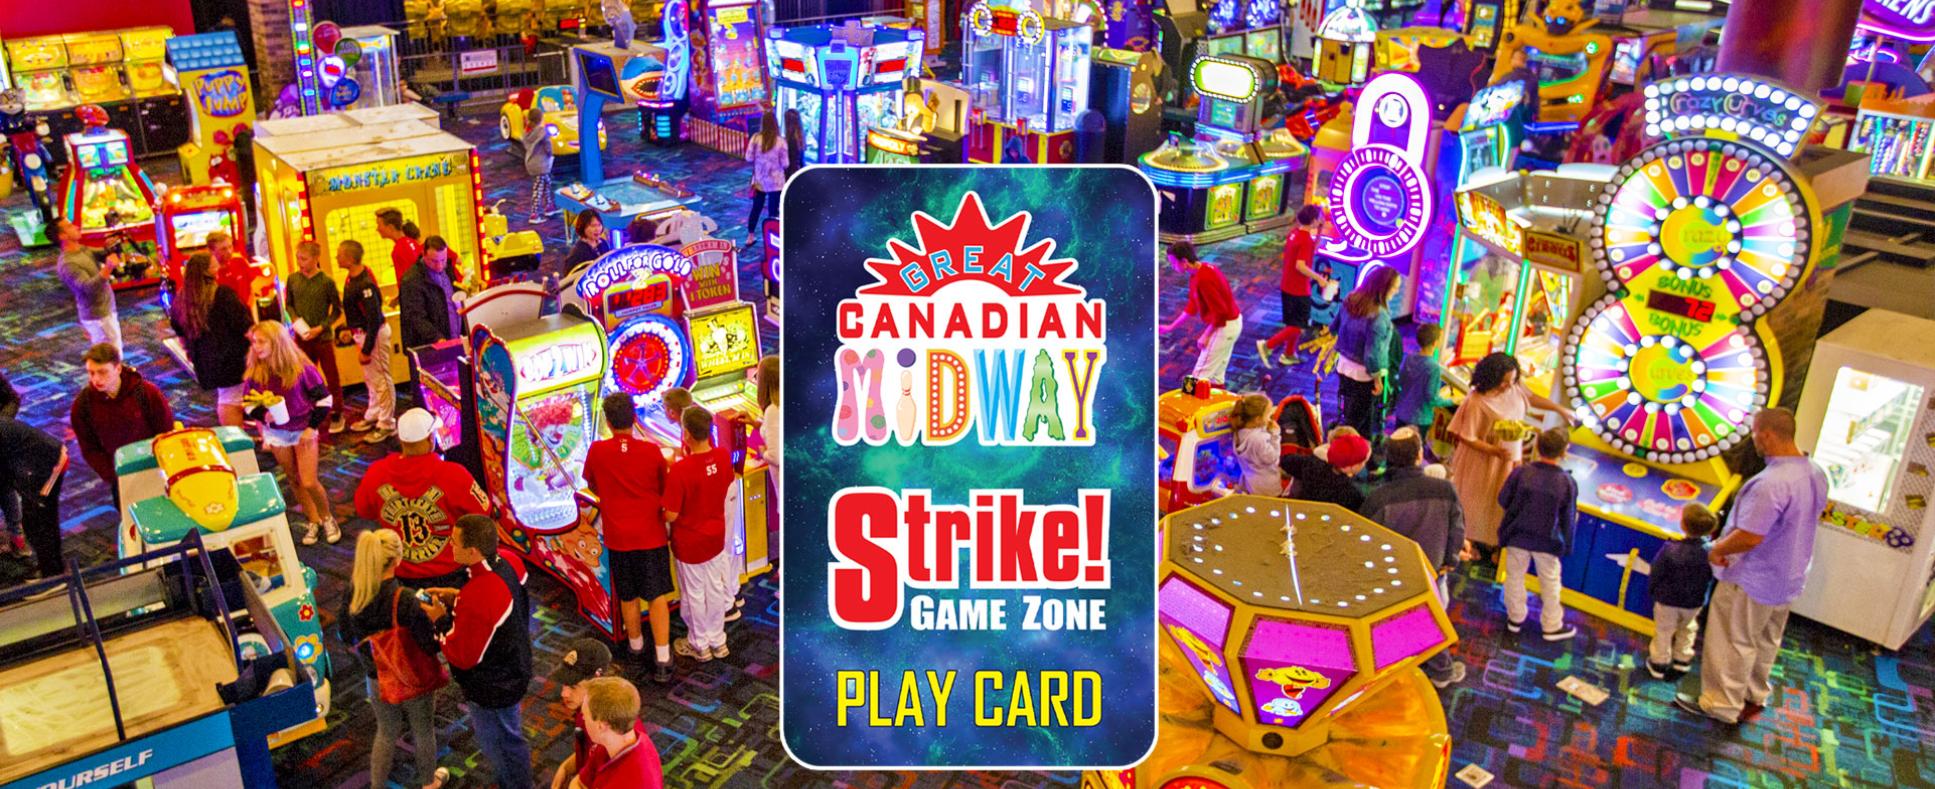 Great Canadian Midway Play Card Offer